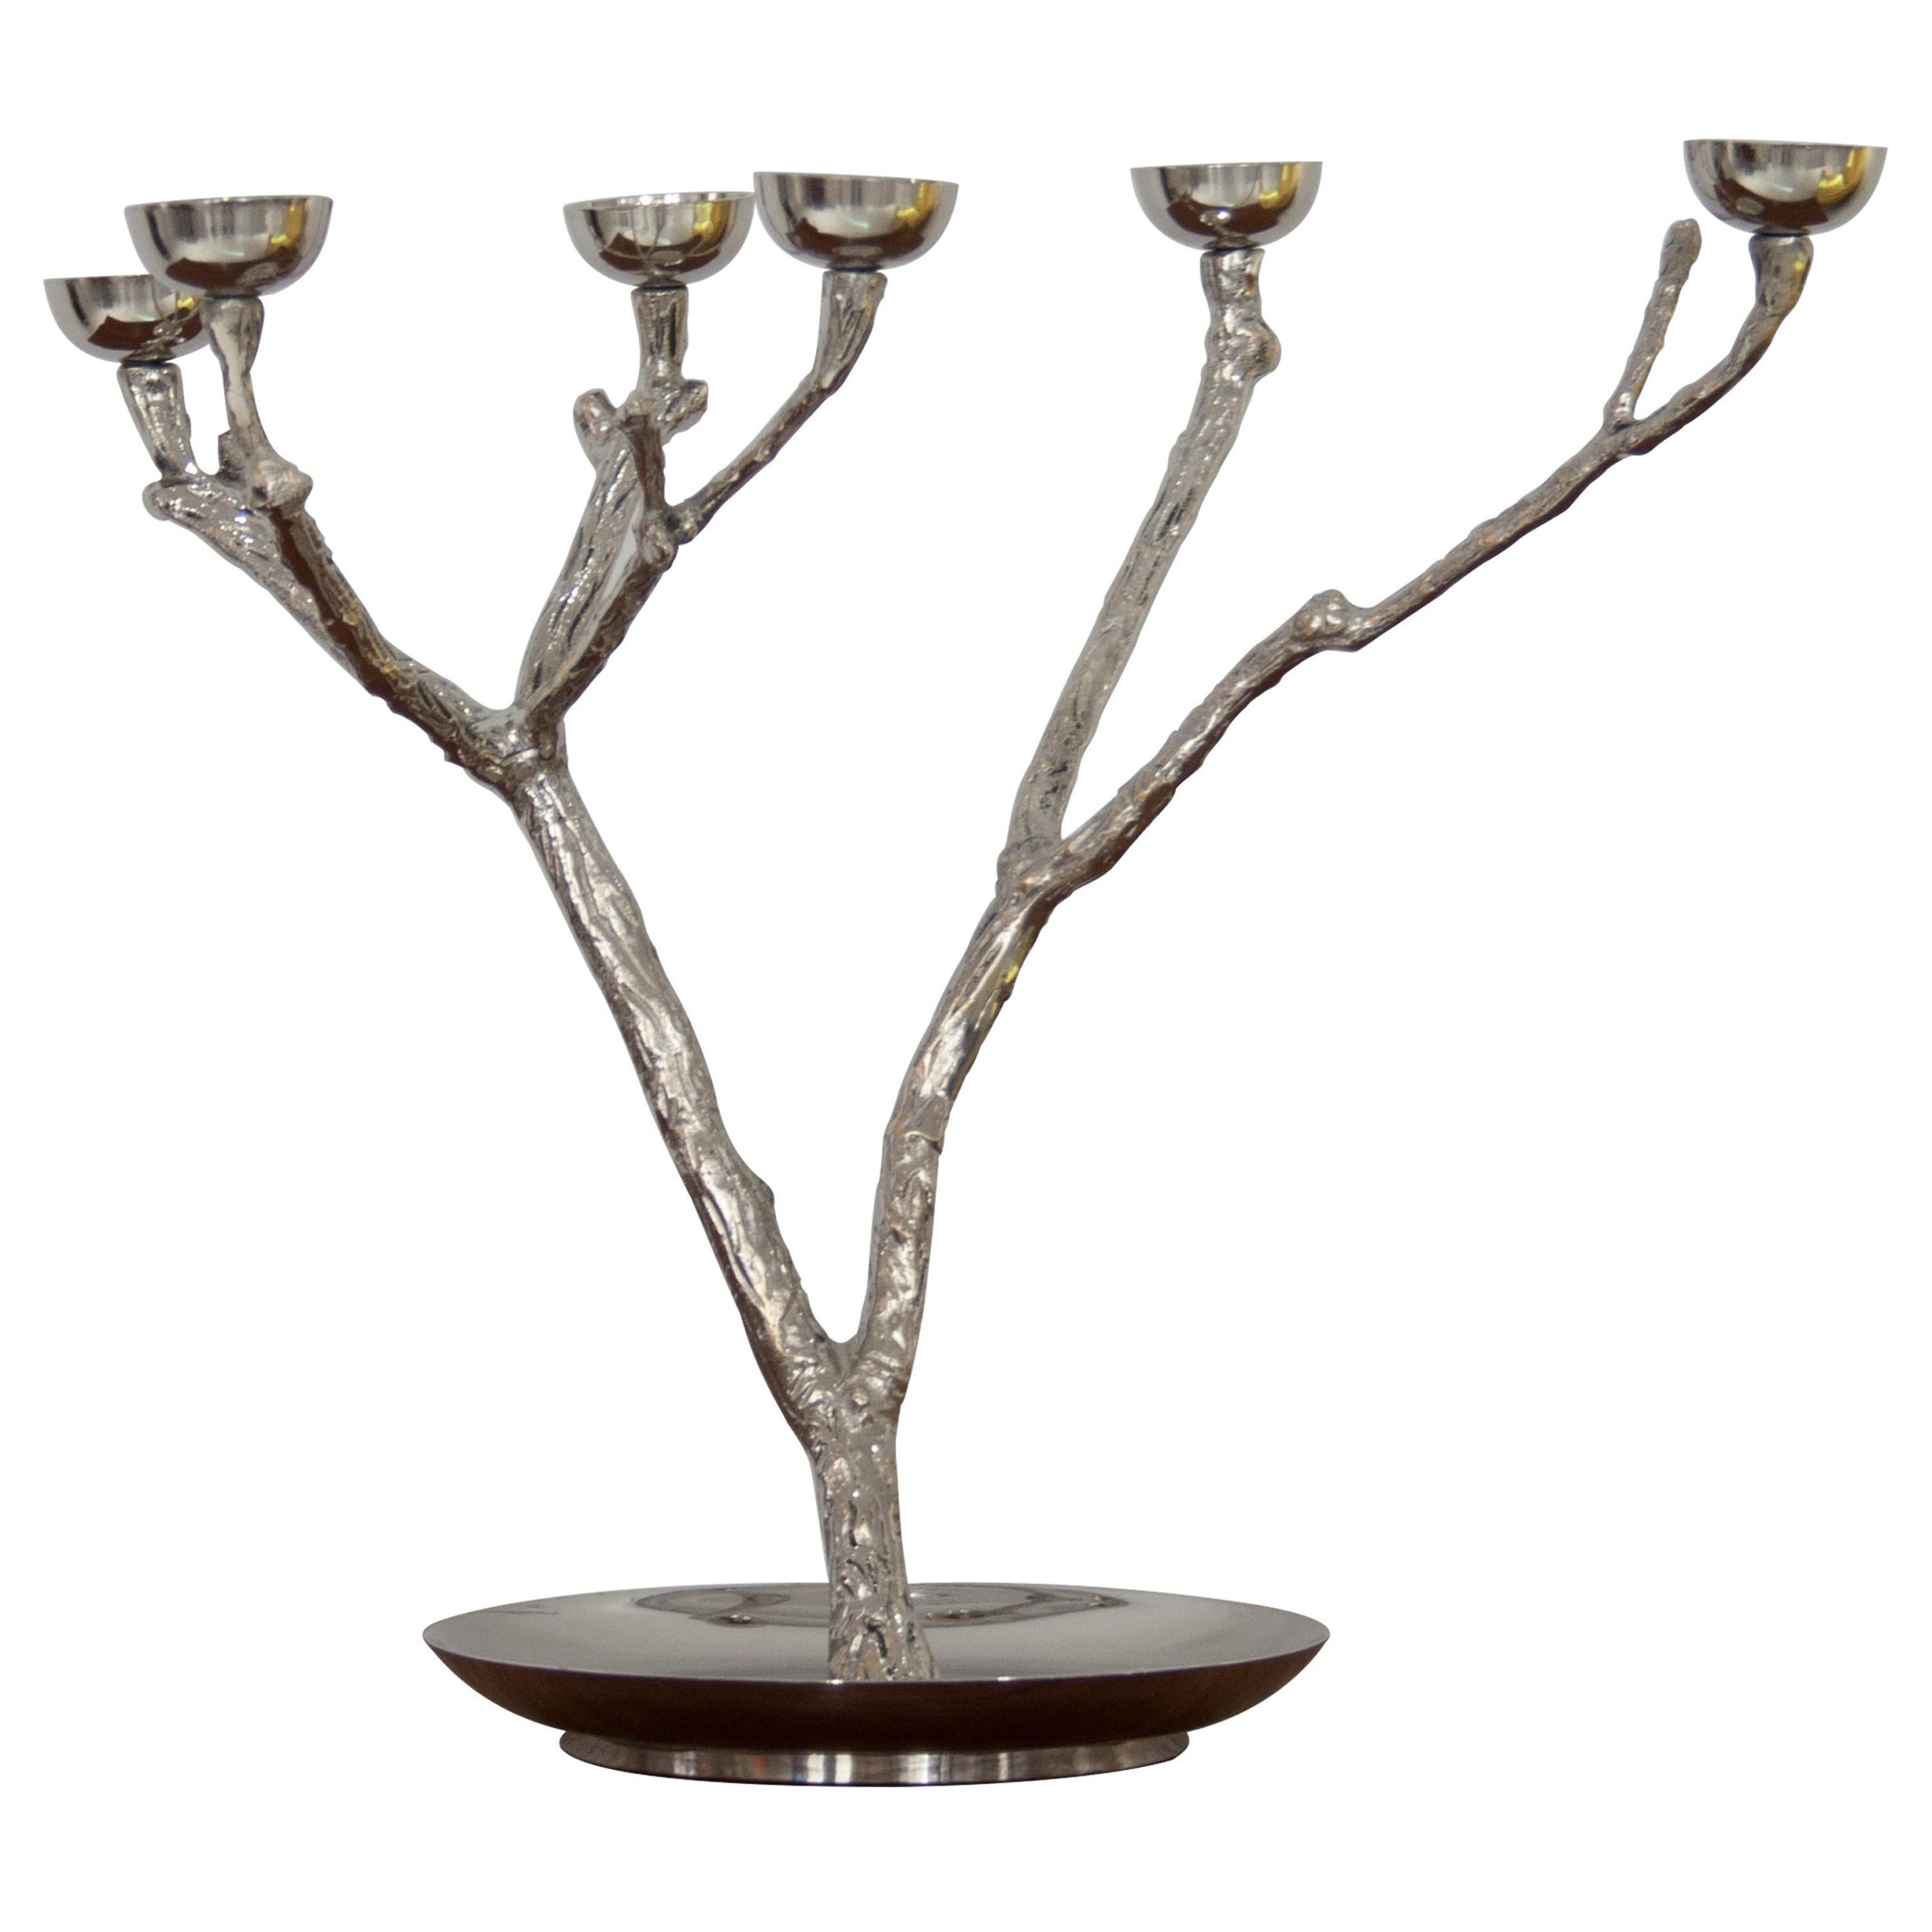 Contemporary Nickel Plated Candle Holder, Netherlands, 2020 For Sale